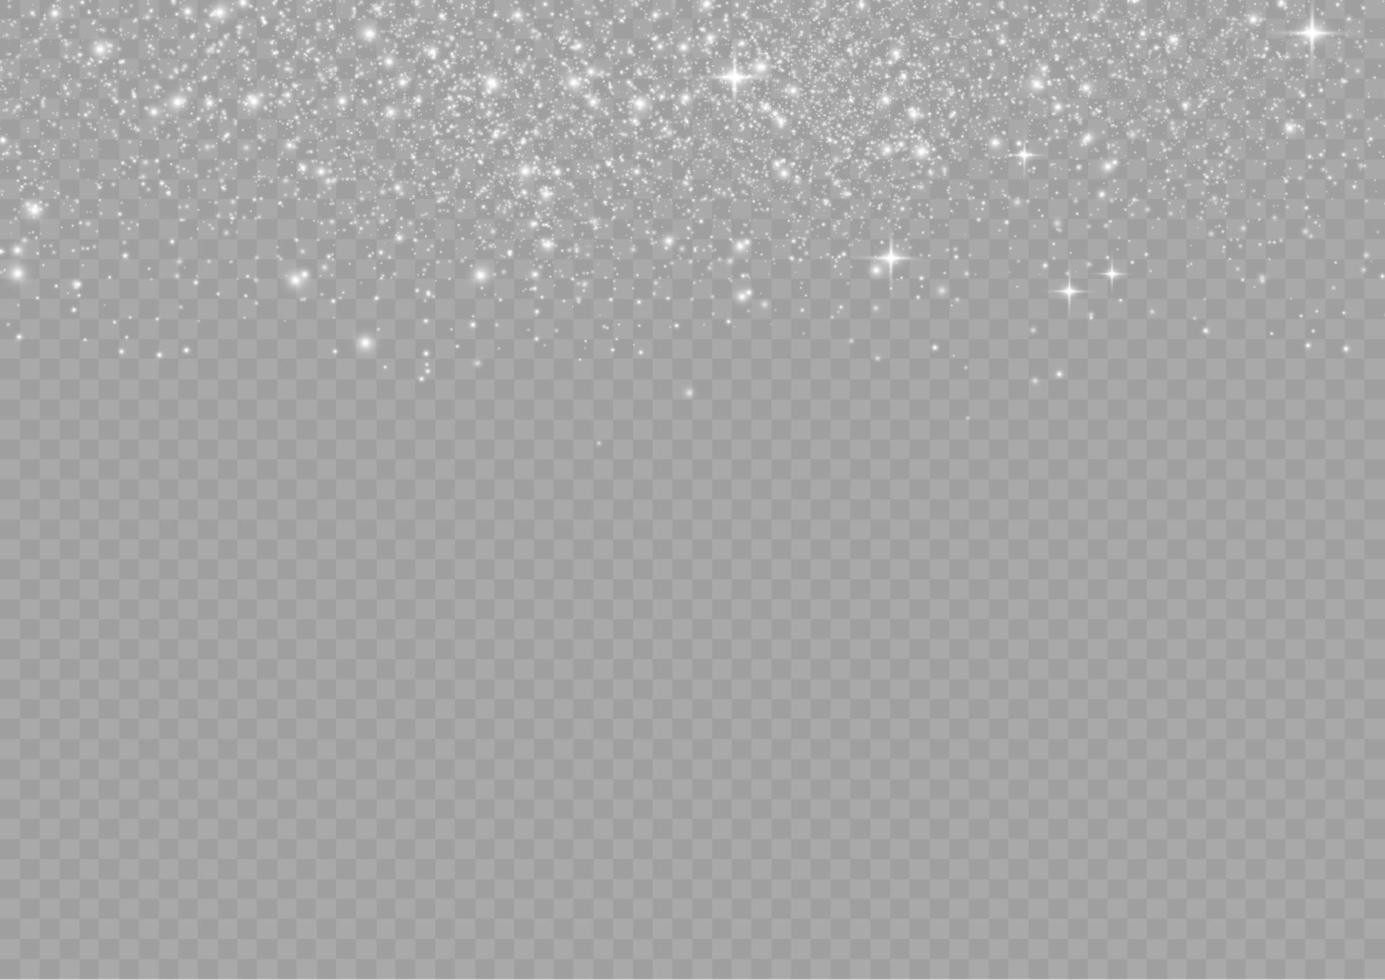 White sparks glitter special light effect. Vector sparkles. Christmas abstract dust. Sparkling magic dust particles effect. Sparkling texture. Stardust sparks